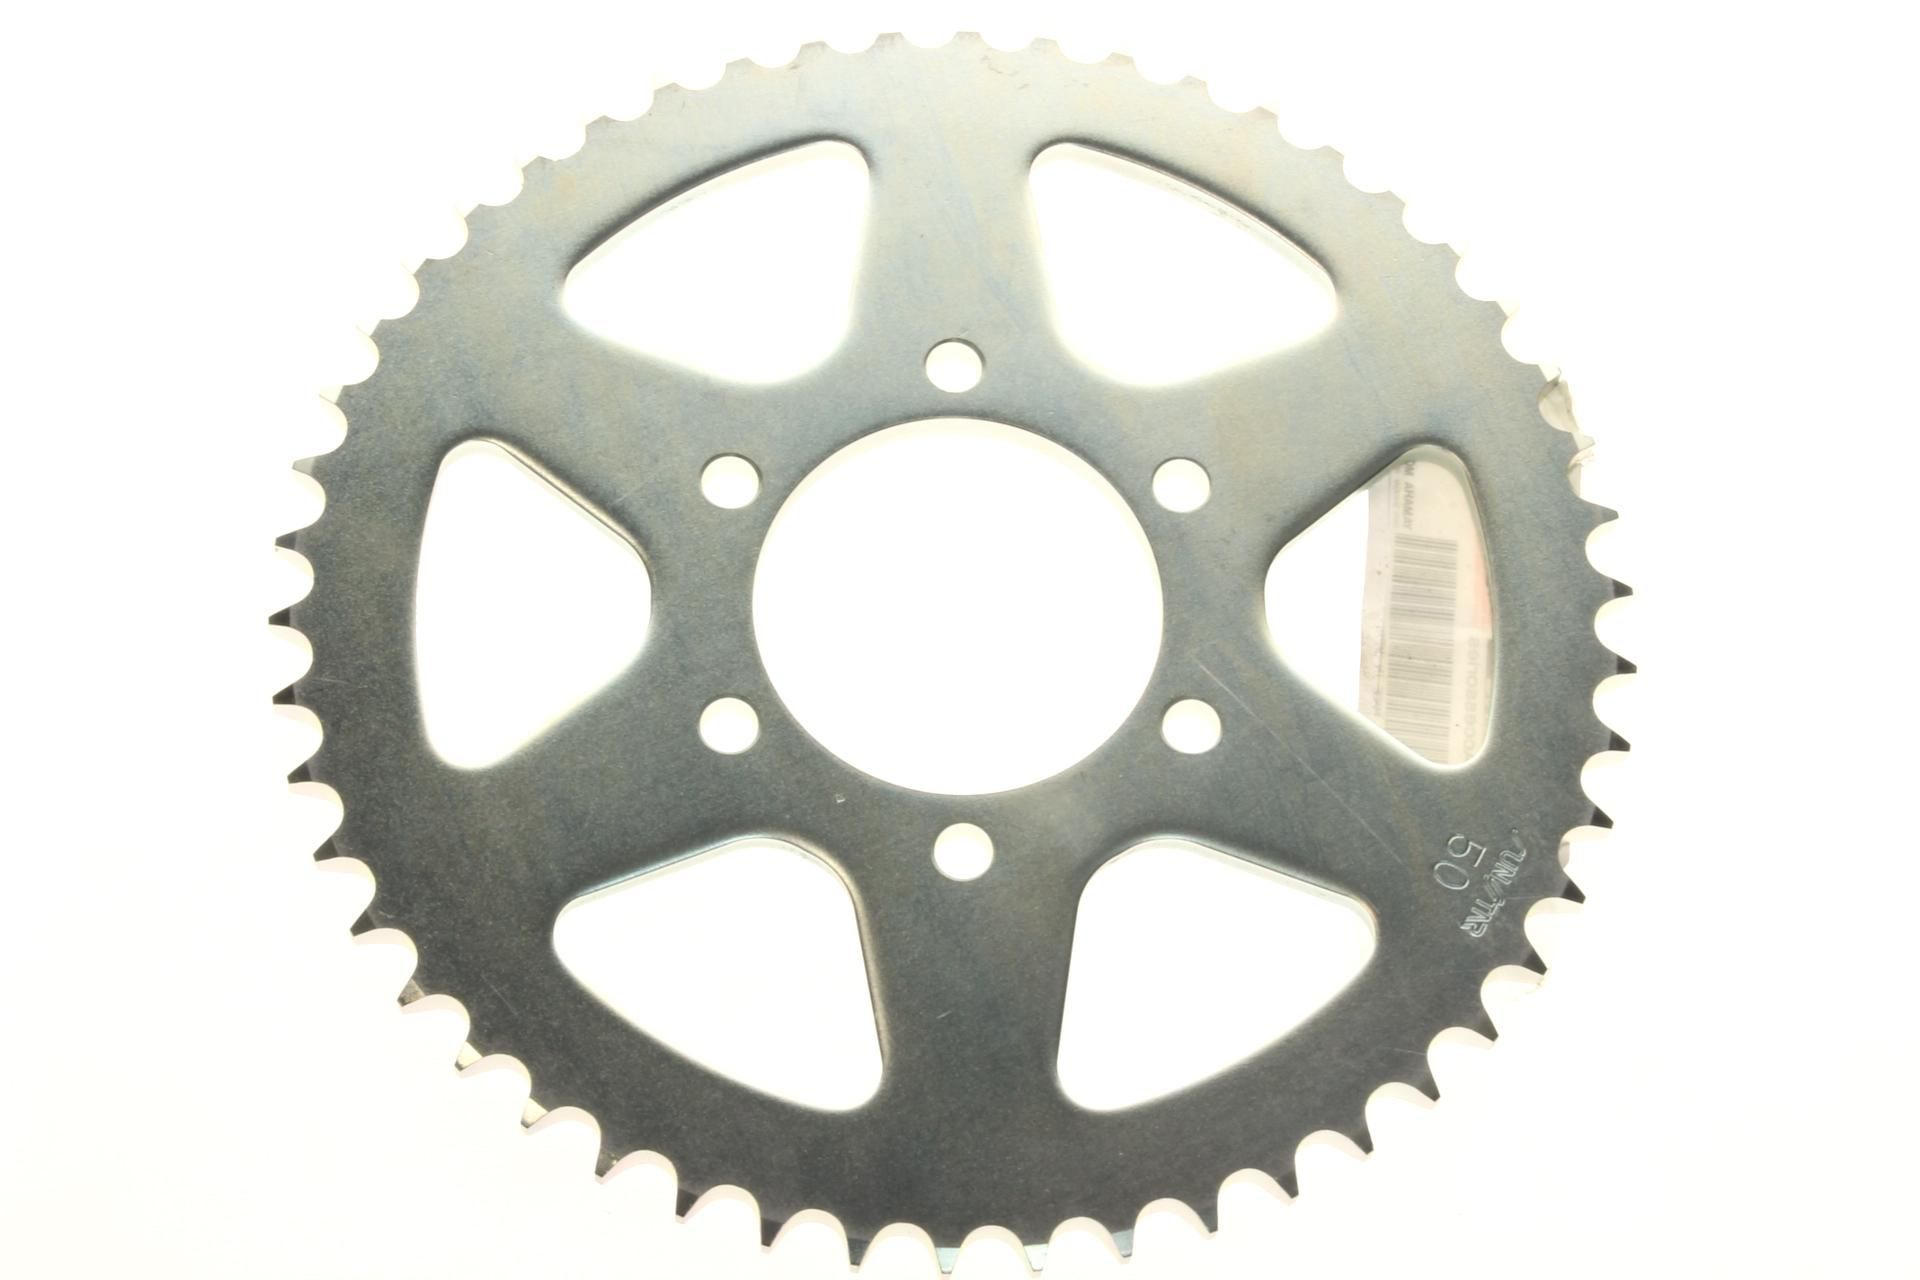 15A-25450-10-00 Superseded by 15A-25450-20-00 - SPROCKET, DRIVEN (